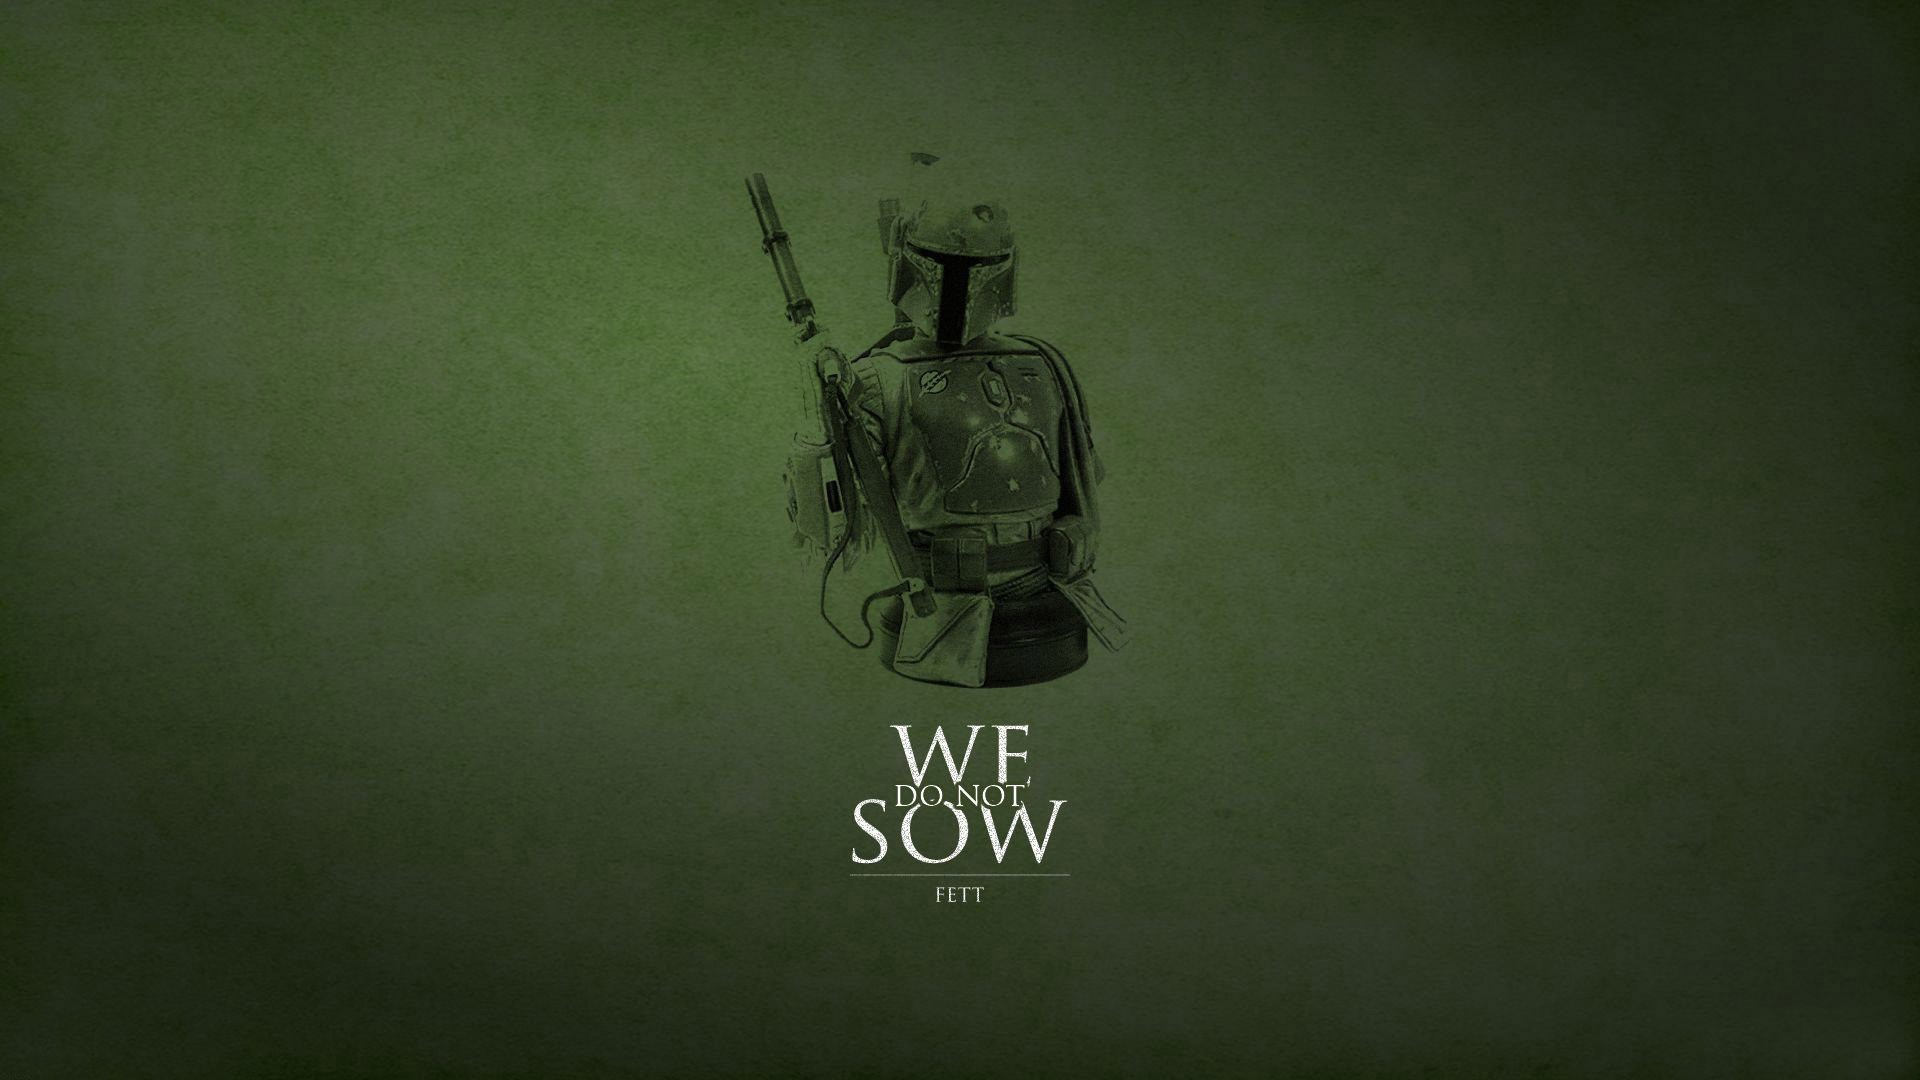 Star Wars, green background wallpapers and images - wallpapers ...